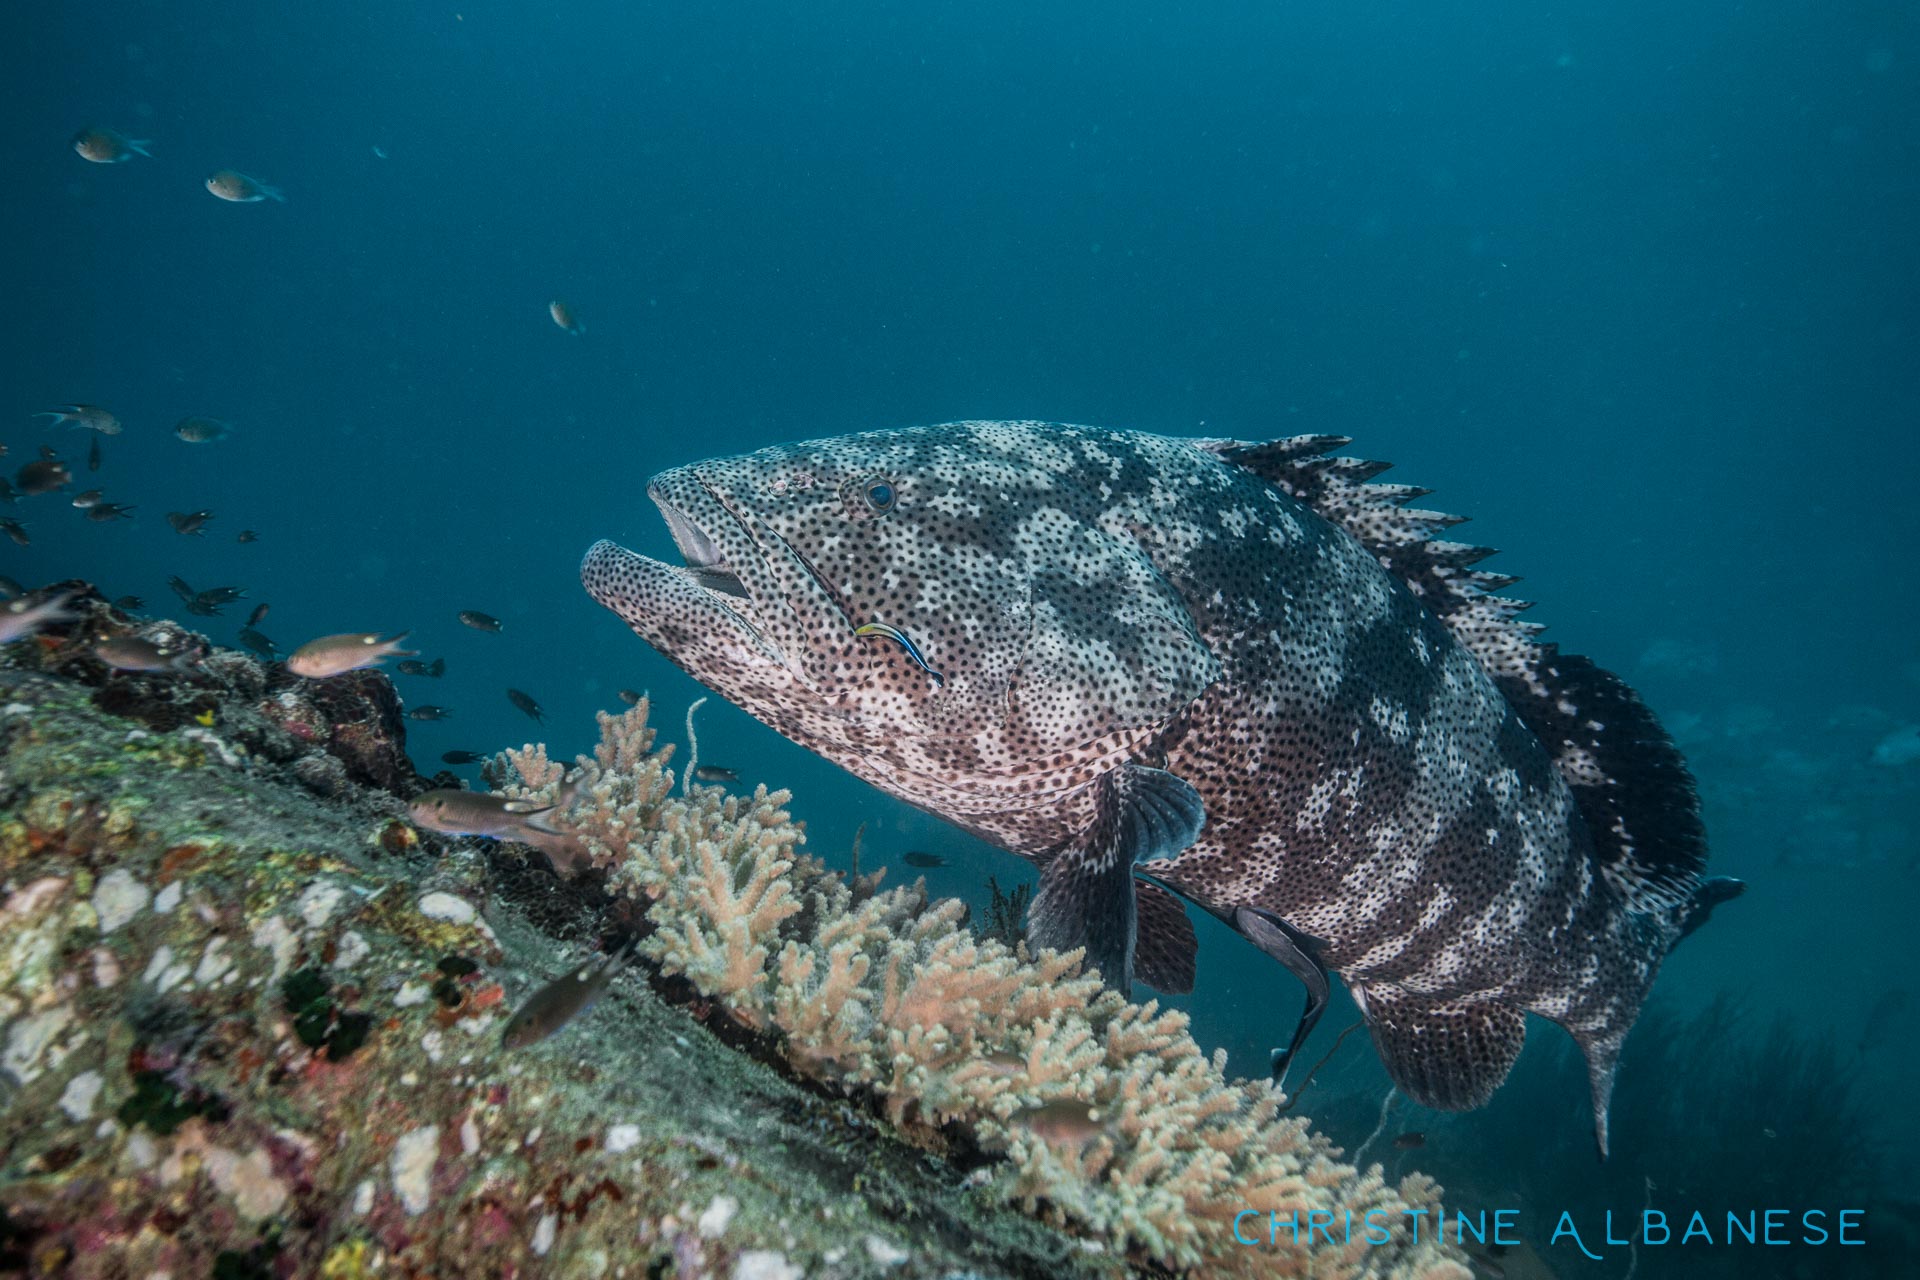 Malabar groupers (Epinephelus Malabaricus) around Koh Tao are actually quite approachable unlike the other species we have around here which tend to be a little skittish. They are the biggest species we have in this area, some reaching almost a metre in length! 